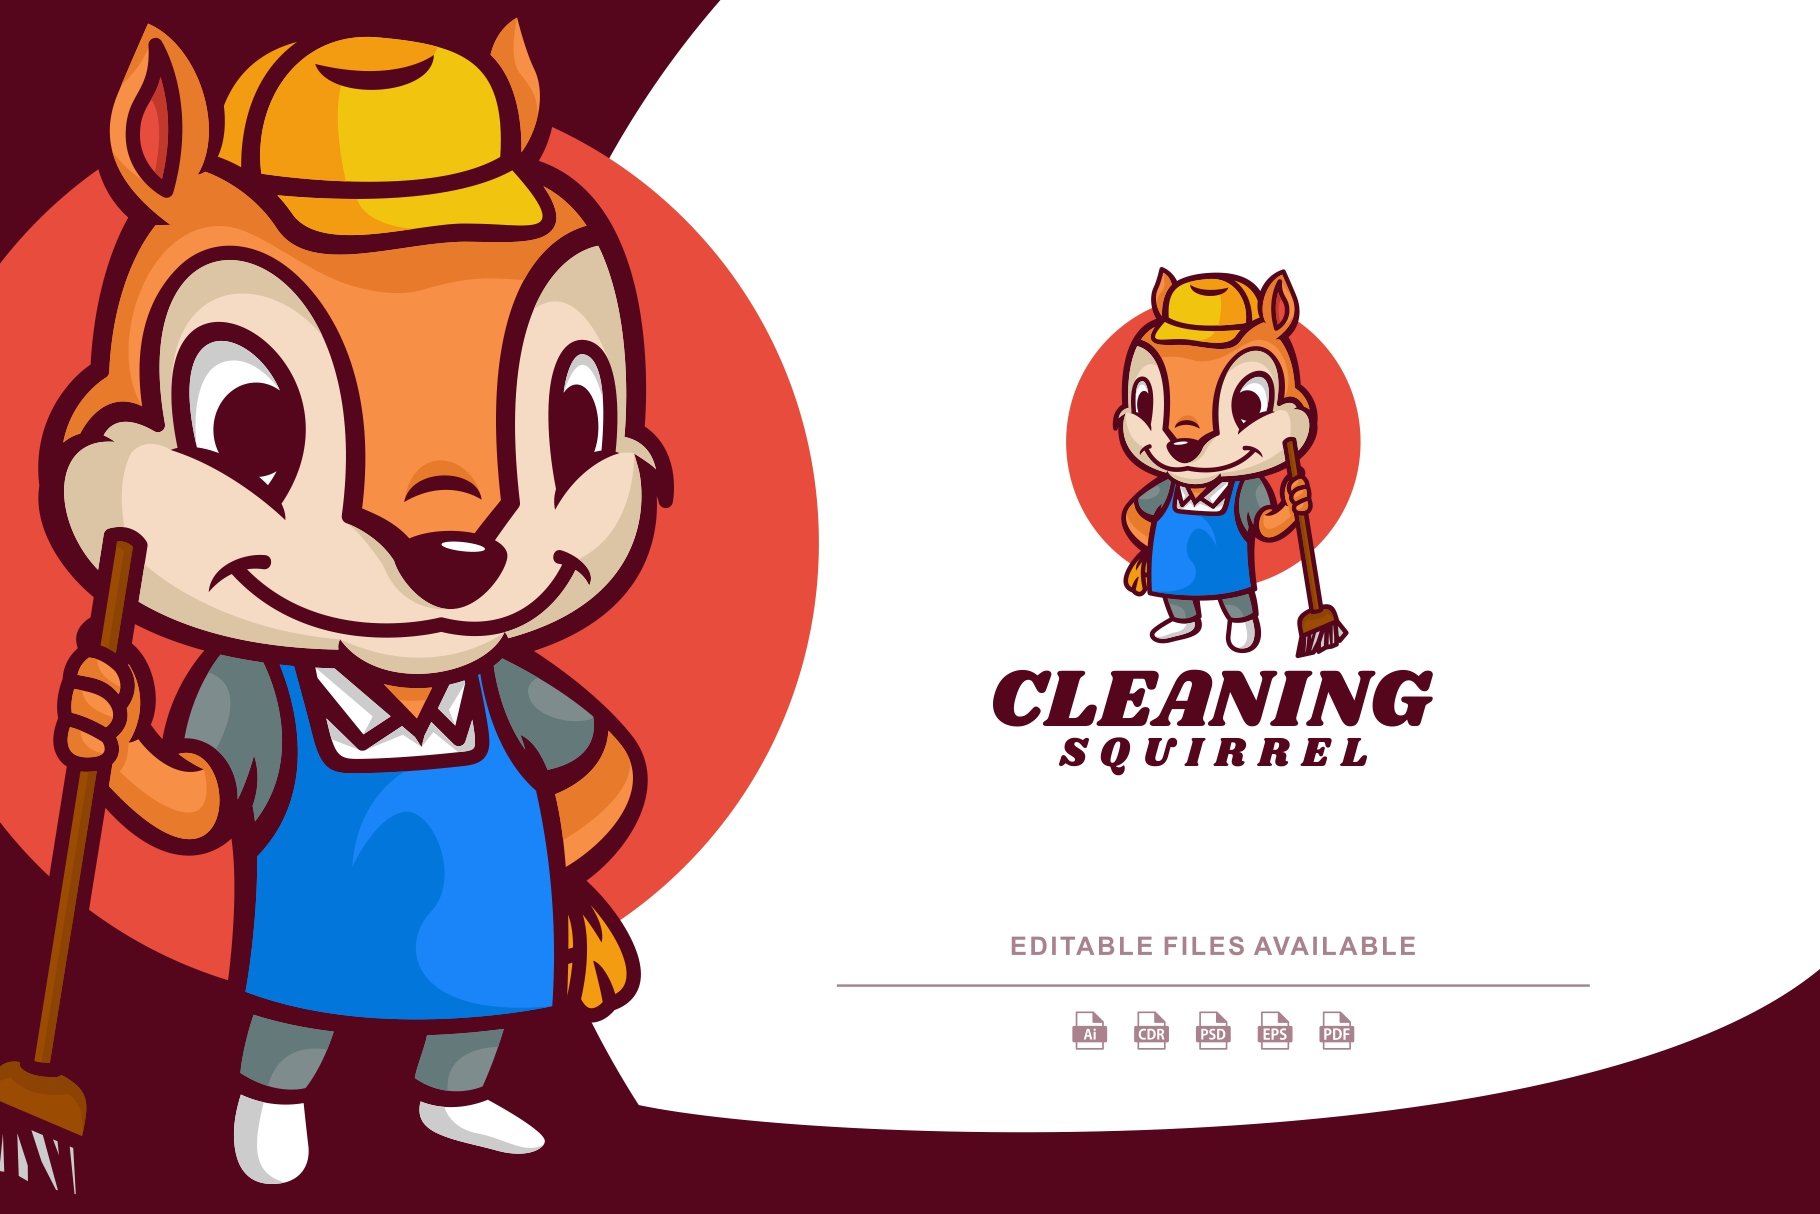 Cleaning Squirrel Cartoon Logo cover image.